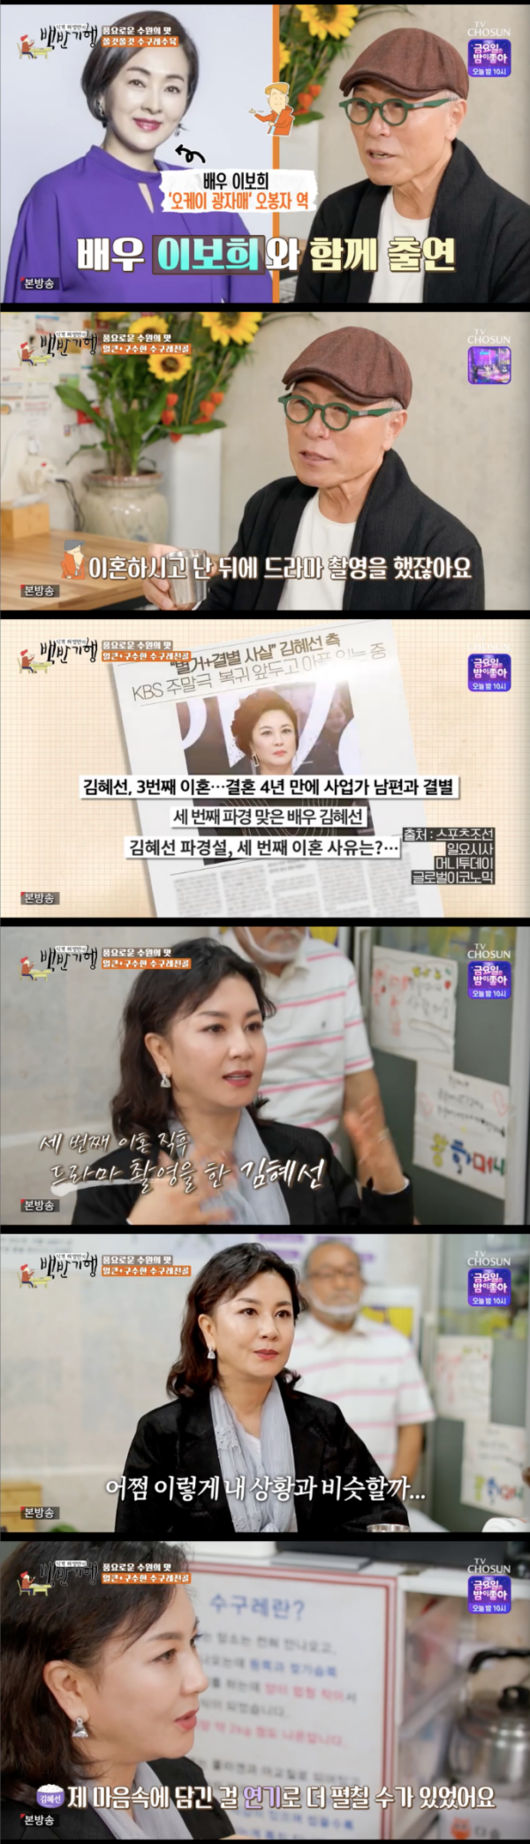 Kim Hye-Seon, a white-half-time, mentioned the third divorce.Actor Kim Hye-Seon appeared on TV Chosun Huh Young Mans Food Travel broadcast on the 19th.On this day, Huh Young-man visited Suwon FC, the city of the castle. Huh Young-man told Kim Hye-Seon, Suwon FC is famous for the king Galbi.Galbi was expensive both in the past and now, so he ate only House of Commons of the United Kingdoms.House of Commons of the United Kingdom was forced to eat only small byproducts, but it was a house to cook with the byproducts. Huh Young-man described the sugure as a tough meat peeled from a metal leather. The boss said, Its a precious part that comes out only about 2.5 kilograms per cow.We have a lot of collagen, so it has been reexamined as a healthy diet, so we started the store, the boss added.Kim Hye-Seon and Huh Young-man were the first to have a sugure; they ordered a suguret and a progeny, with the recommendation of the boss.Kim Hye-Seon, who saw the side dishes such as red pepper leaves, bellflower, and vegetable wares, expressed expectations for food, saying, It comes out neatly.Huh Young-man was curious about elephant garlic, which came out as a side dish. Elephant garlic is a big garlic.Huh Young-man explained the taste as a hard onion-like texture.The soup-and-pepper was first introduced. Kim Hye-Seon admired it, saying, Its like jelly, and its so chewy.Huh Young-man also expressed satisfaction, saying, I am tougher and more sue than any part of beef. He also said, I feel like chewing pig skin.Kim Hye-Seon enjoyed the food deliciously, saying, The more you chew, the more you succumb.The boss explained about the sugure, When I first brought it, it is soft like a intestine, but once it is boiled, it hardens.Sugure puts laurel leaves, cinnamon, and ginger in the boiled water and boils it for 5 minutes to catch it.What is this sticky stuff that feels like oil? asked Huh Young-man. Its collage and nightmarish, the boss said.I think people who are interested in beauty will like it, said Huh Young-man.Huh Young-man said, I am sorry to ask, but after I had a duty, did not you shoot the drama OK photon?Kim Hye-Seon made his third divorce before shooting Drama OK Photon, and he said, How did you get involved?I was practicing the script and the story went off, he said. Drama was like me. So I just put Teppan on my face.I put pain and sadness in Chest and devoted myself to acting, he added.TV Chosun Huh Young Mans Food Travel broadcast screen capture